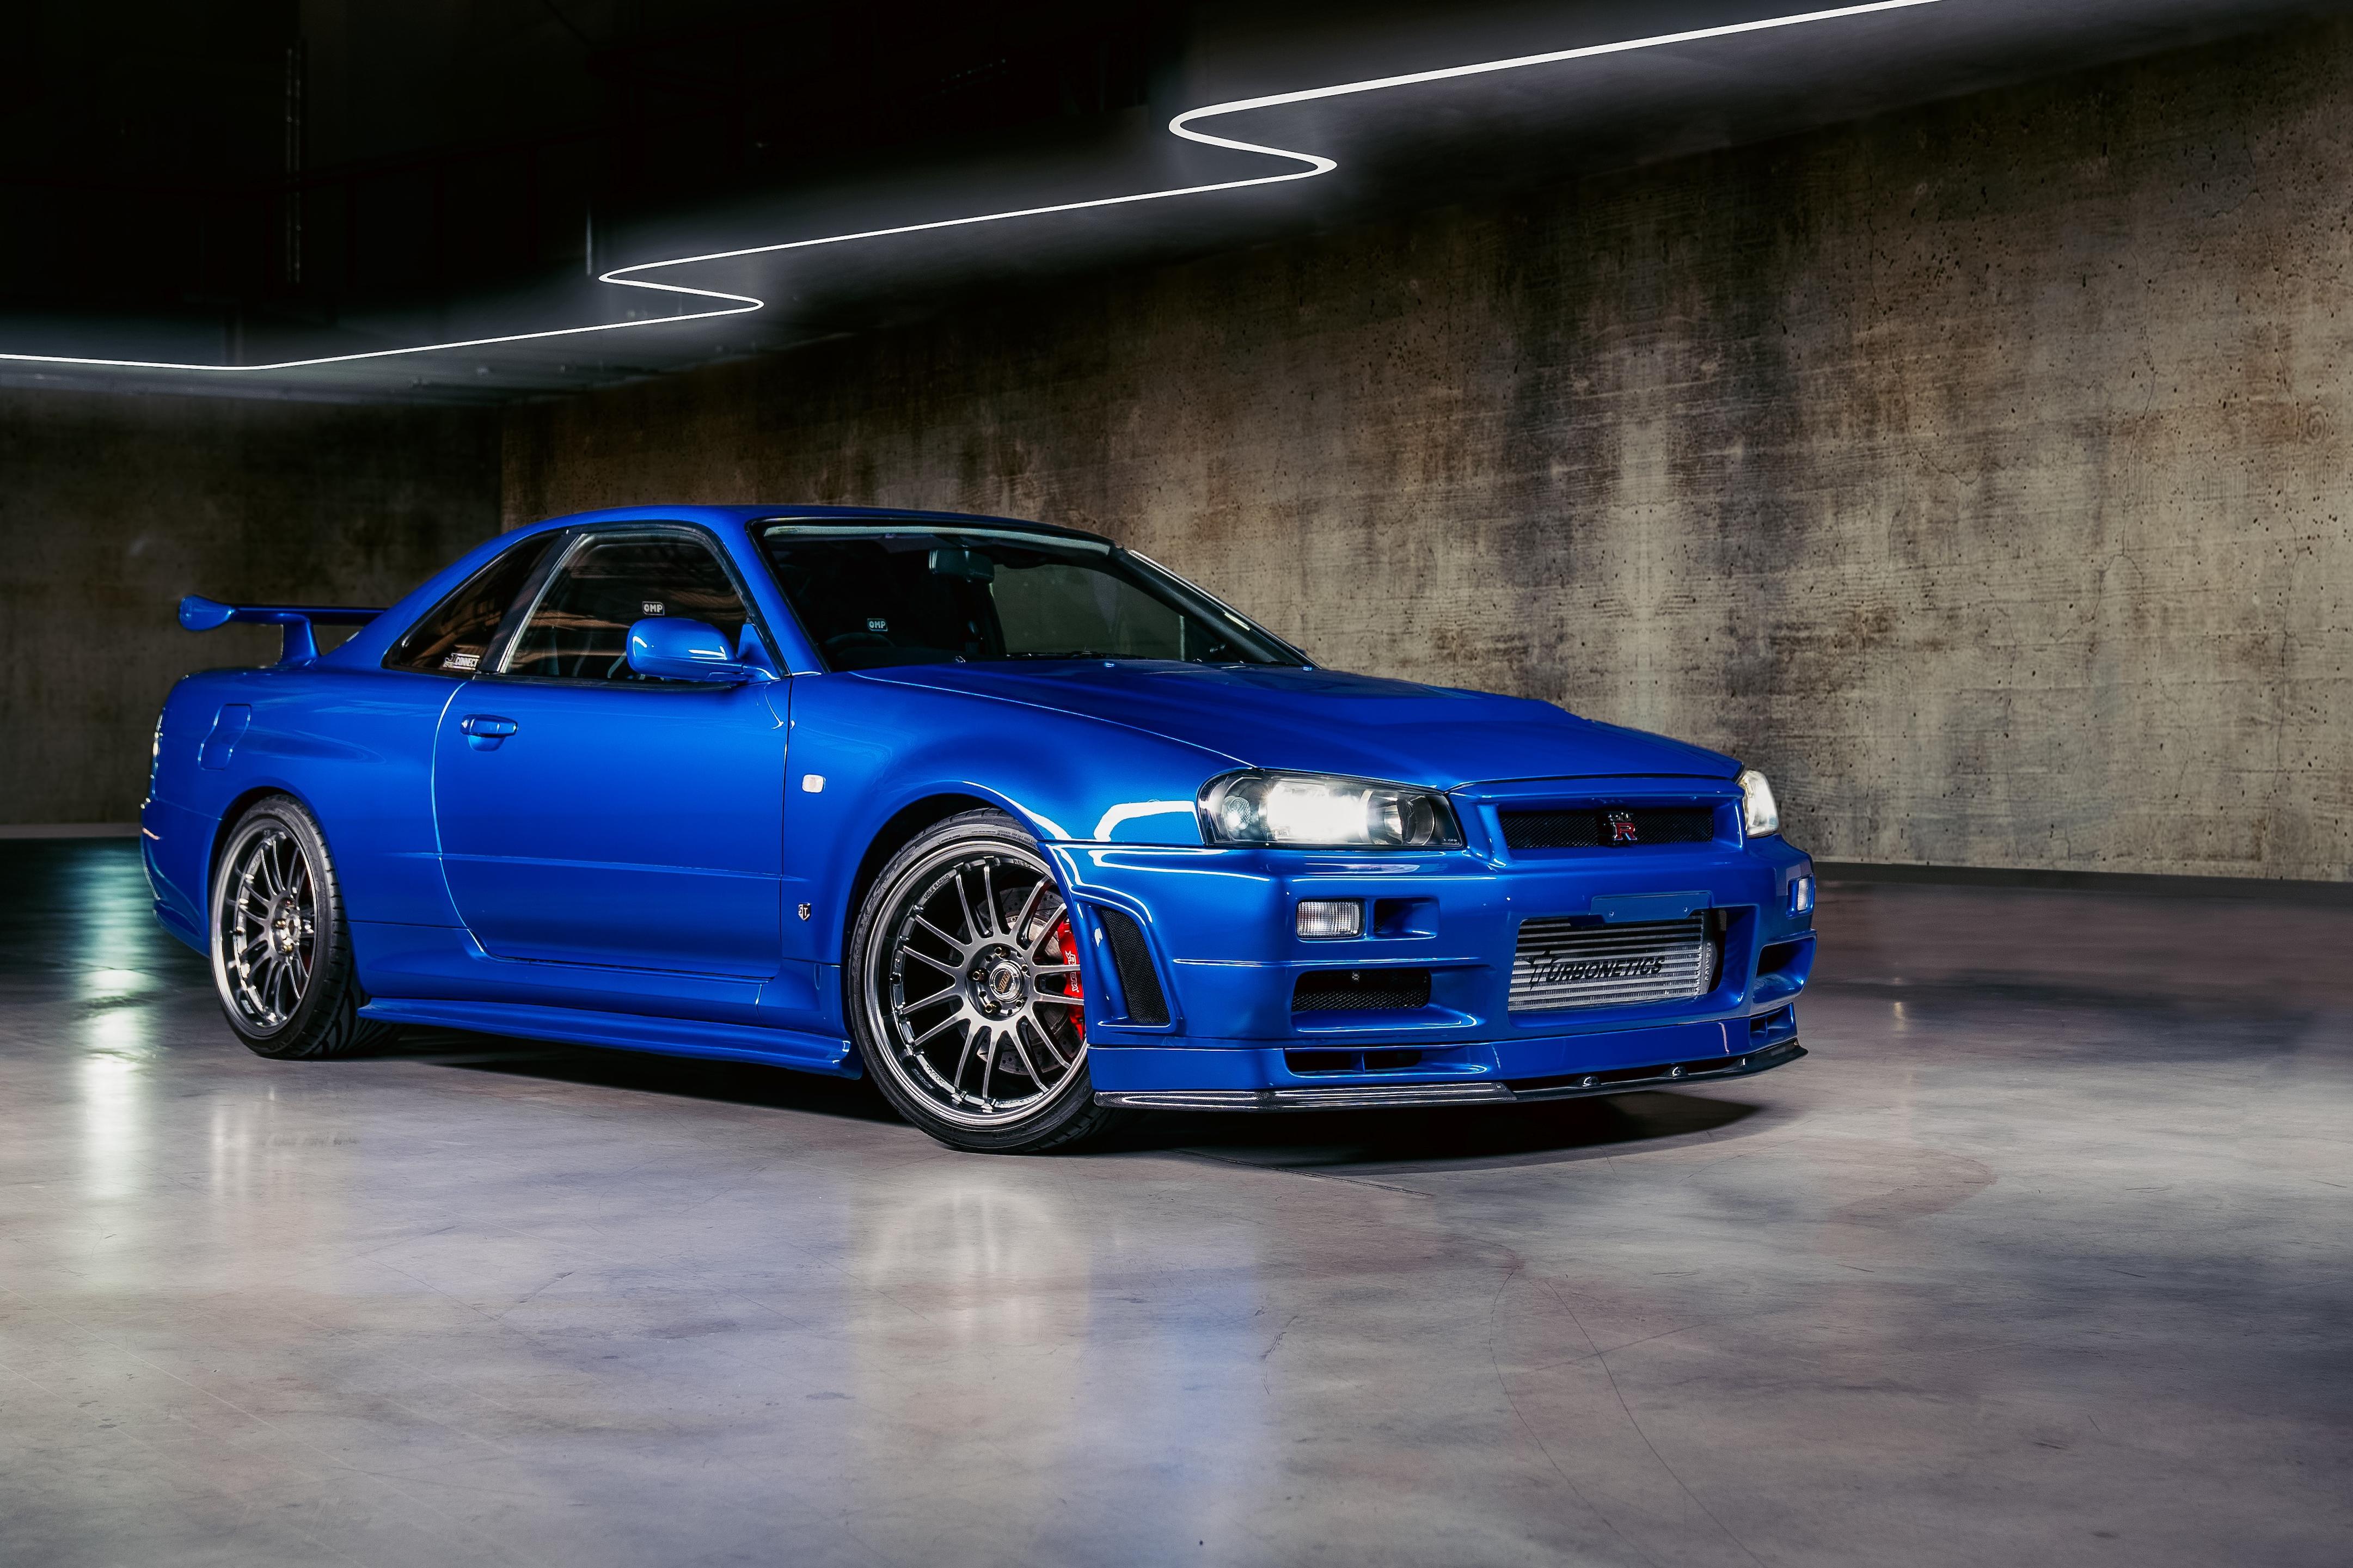 Why the Nissan Skyline GT-R Is a Cultural Icon